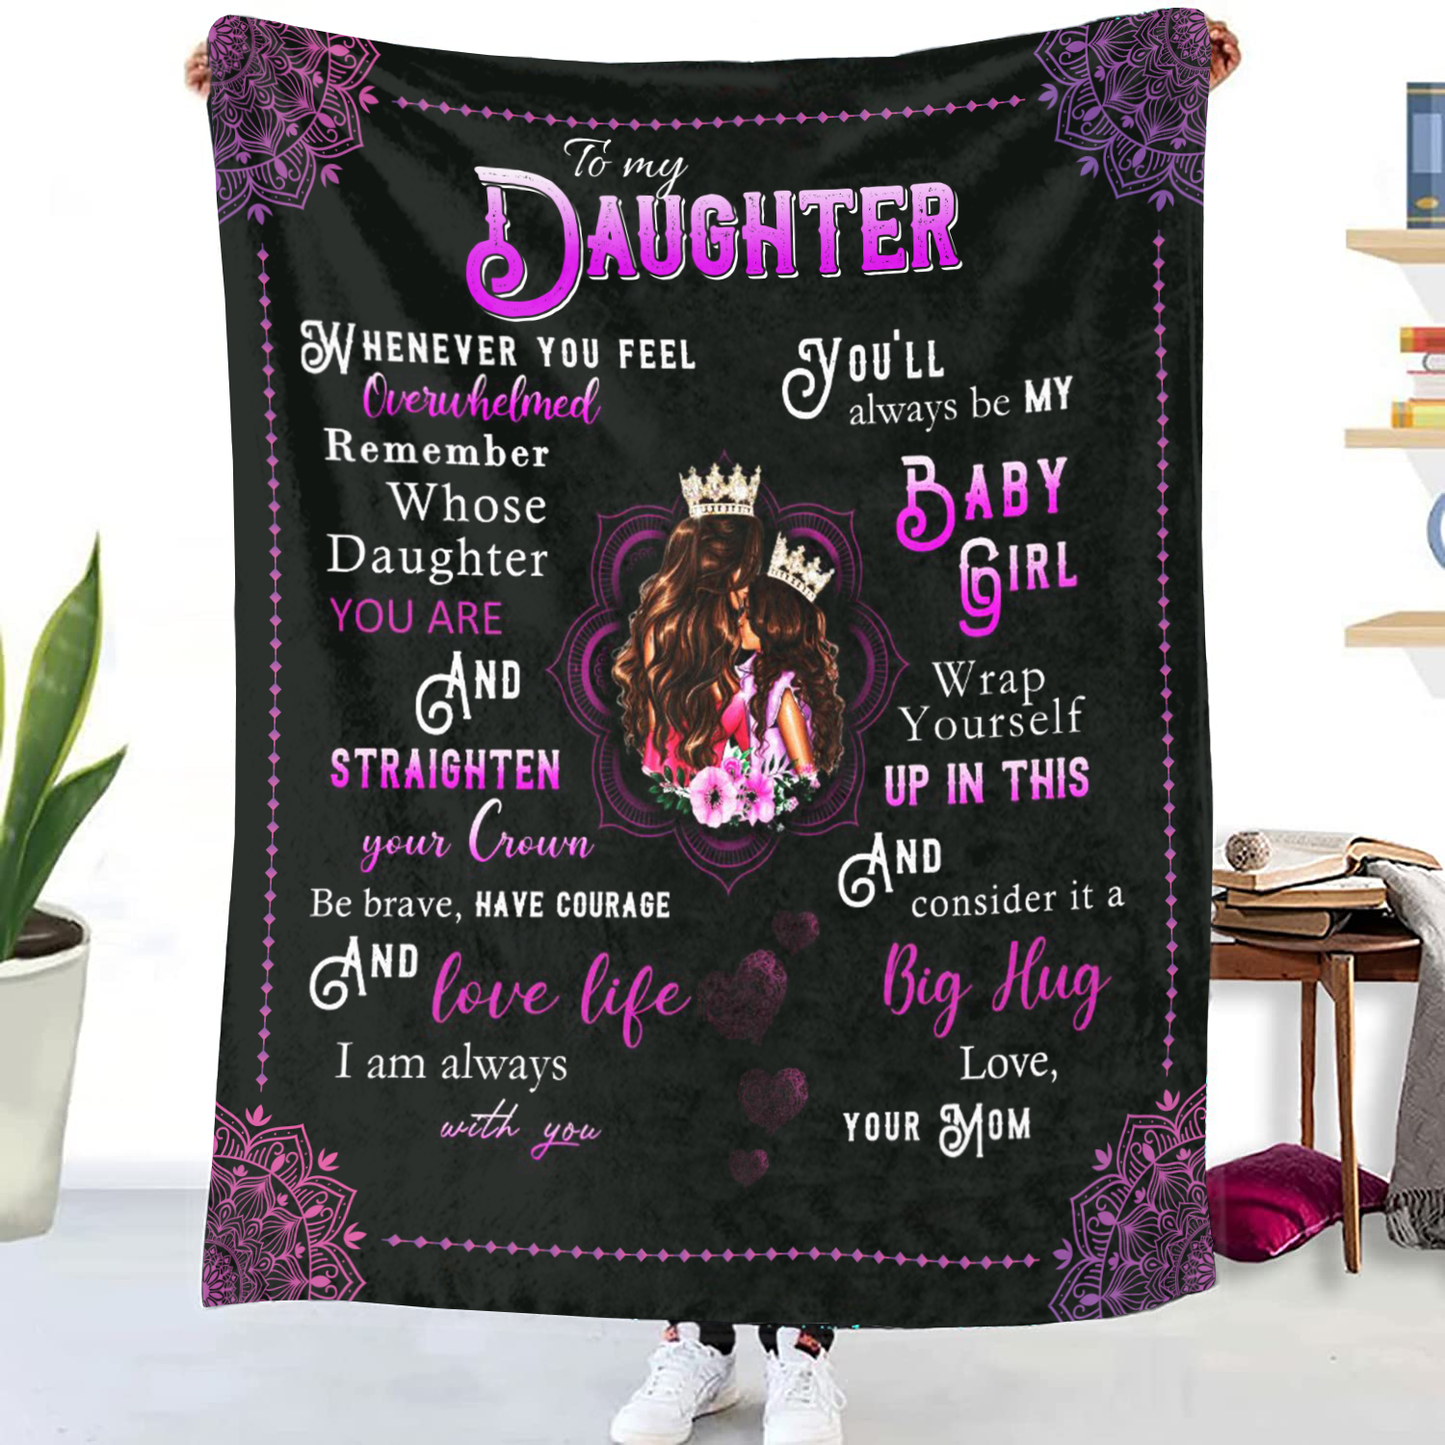 To My Daughter - You'll Always Be Premium Mink Sherpa Blanket